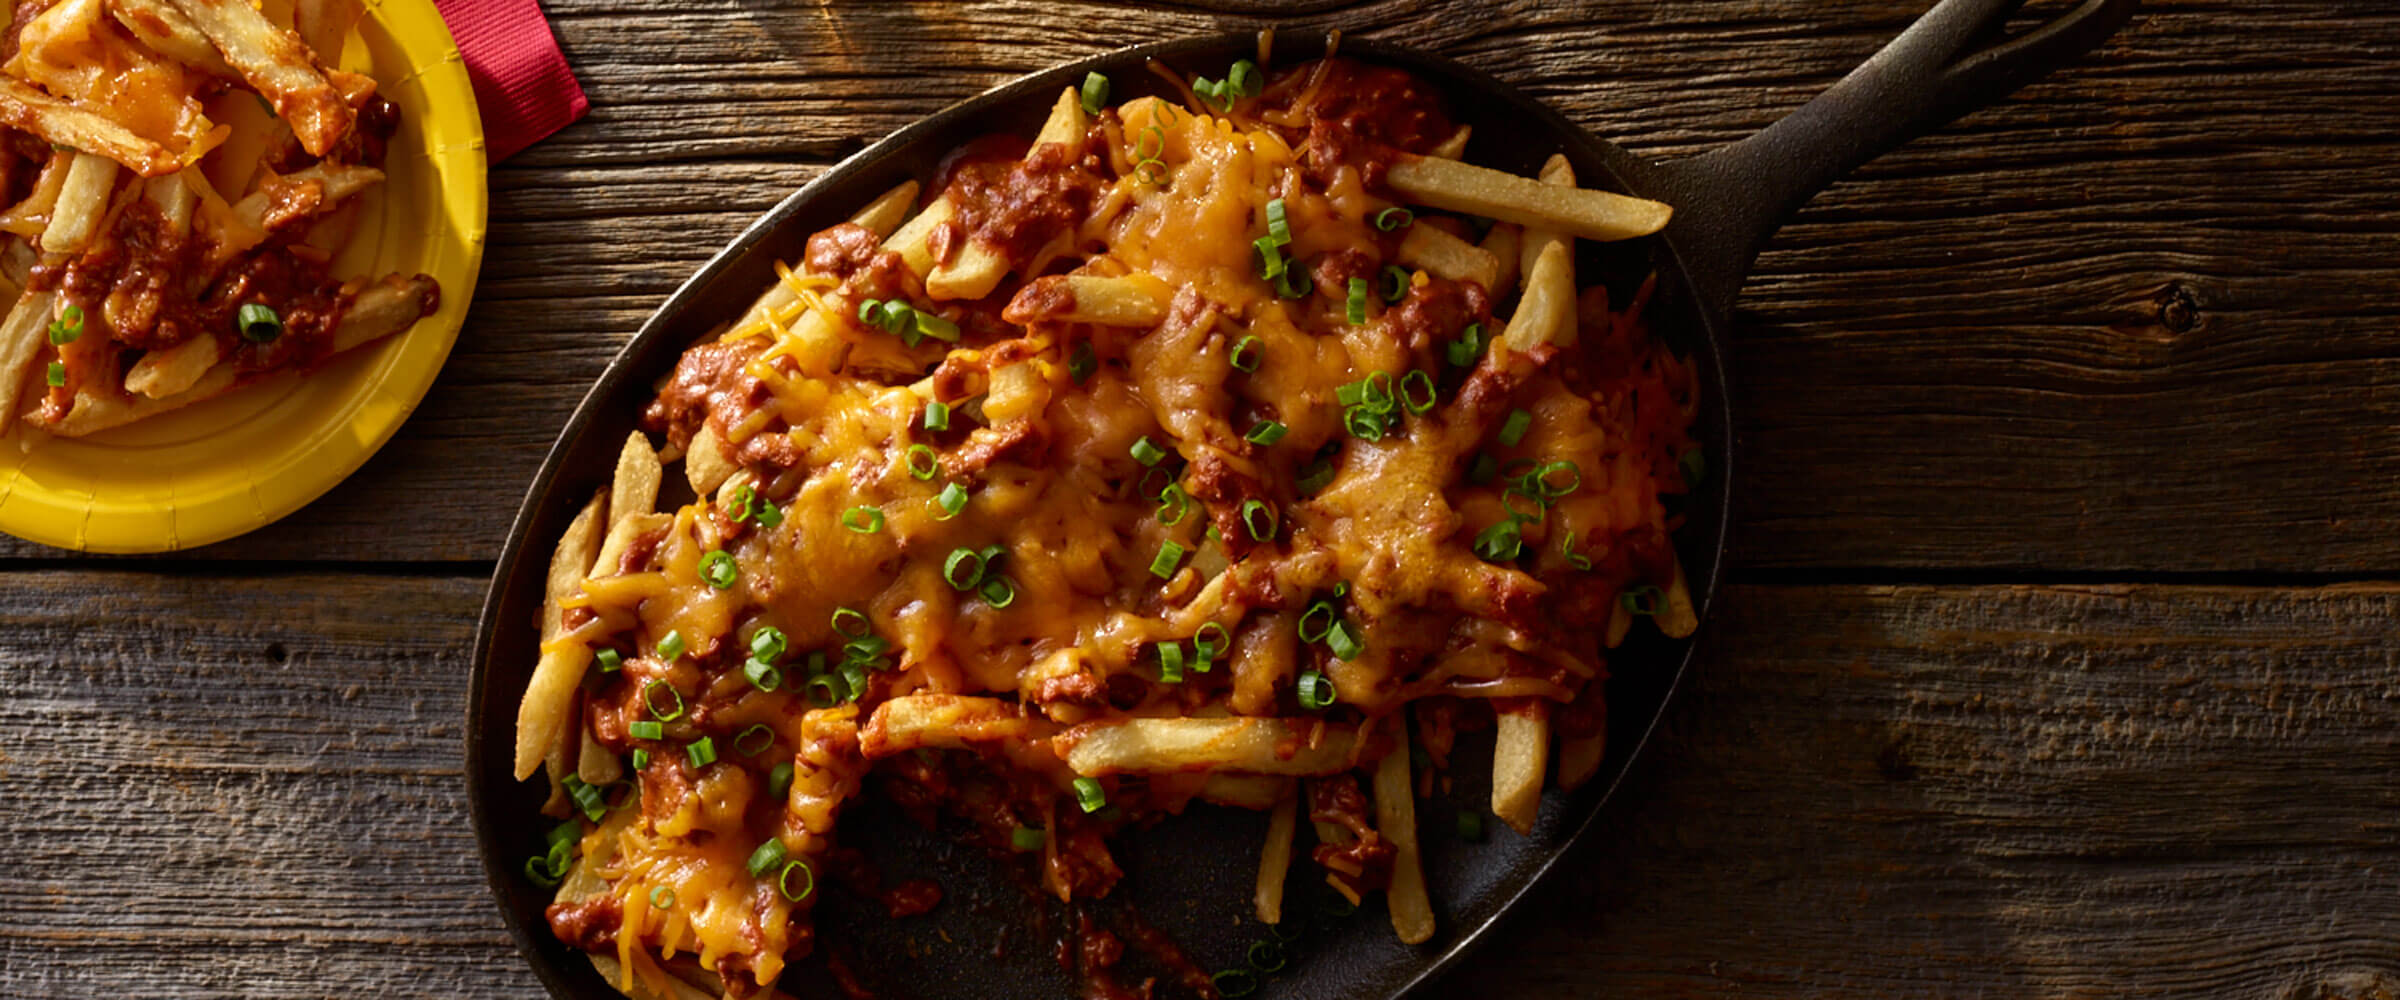 Chili Cheese Fries topped with green onion in skillet on wood table